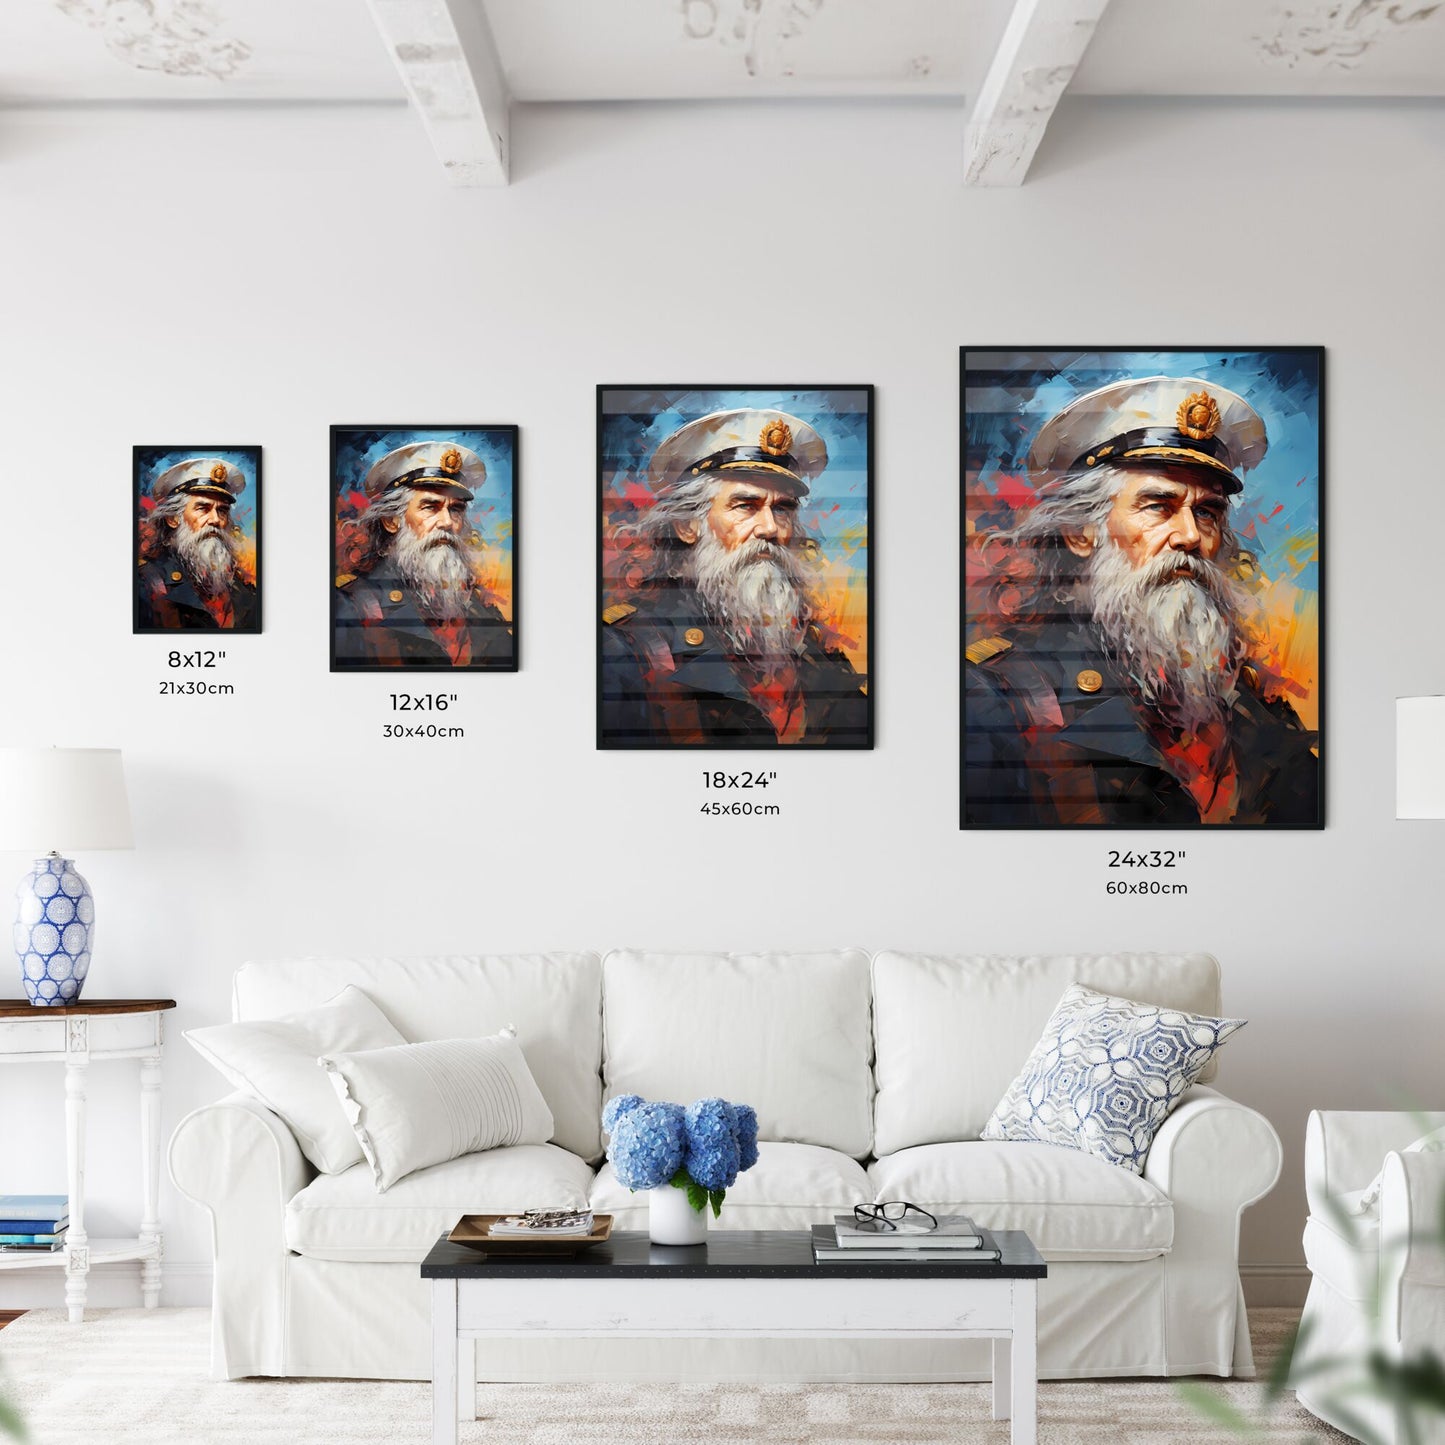 Captain Ahab - A Painting Of A Man In A Military Uniform Default Title